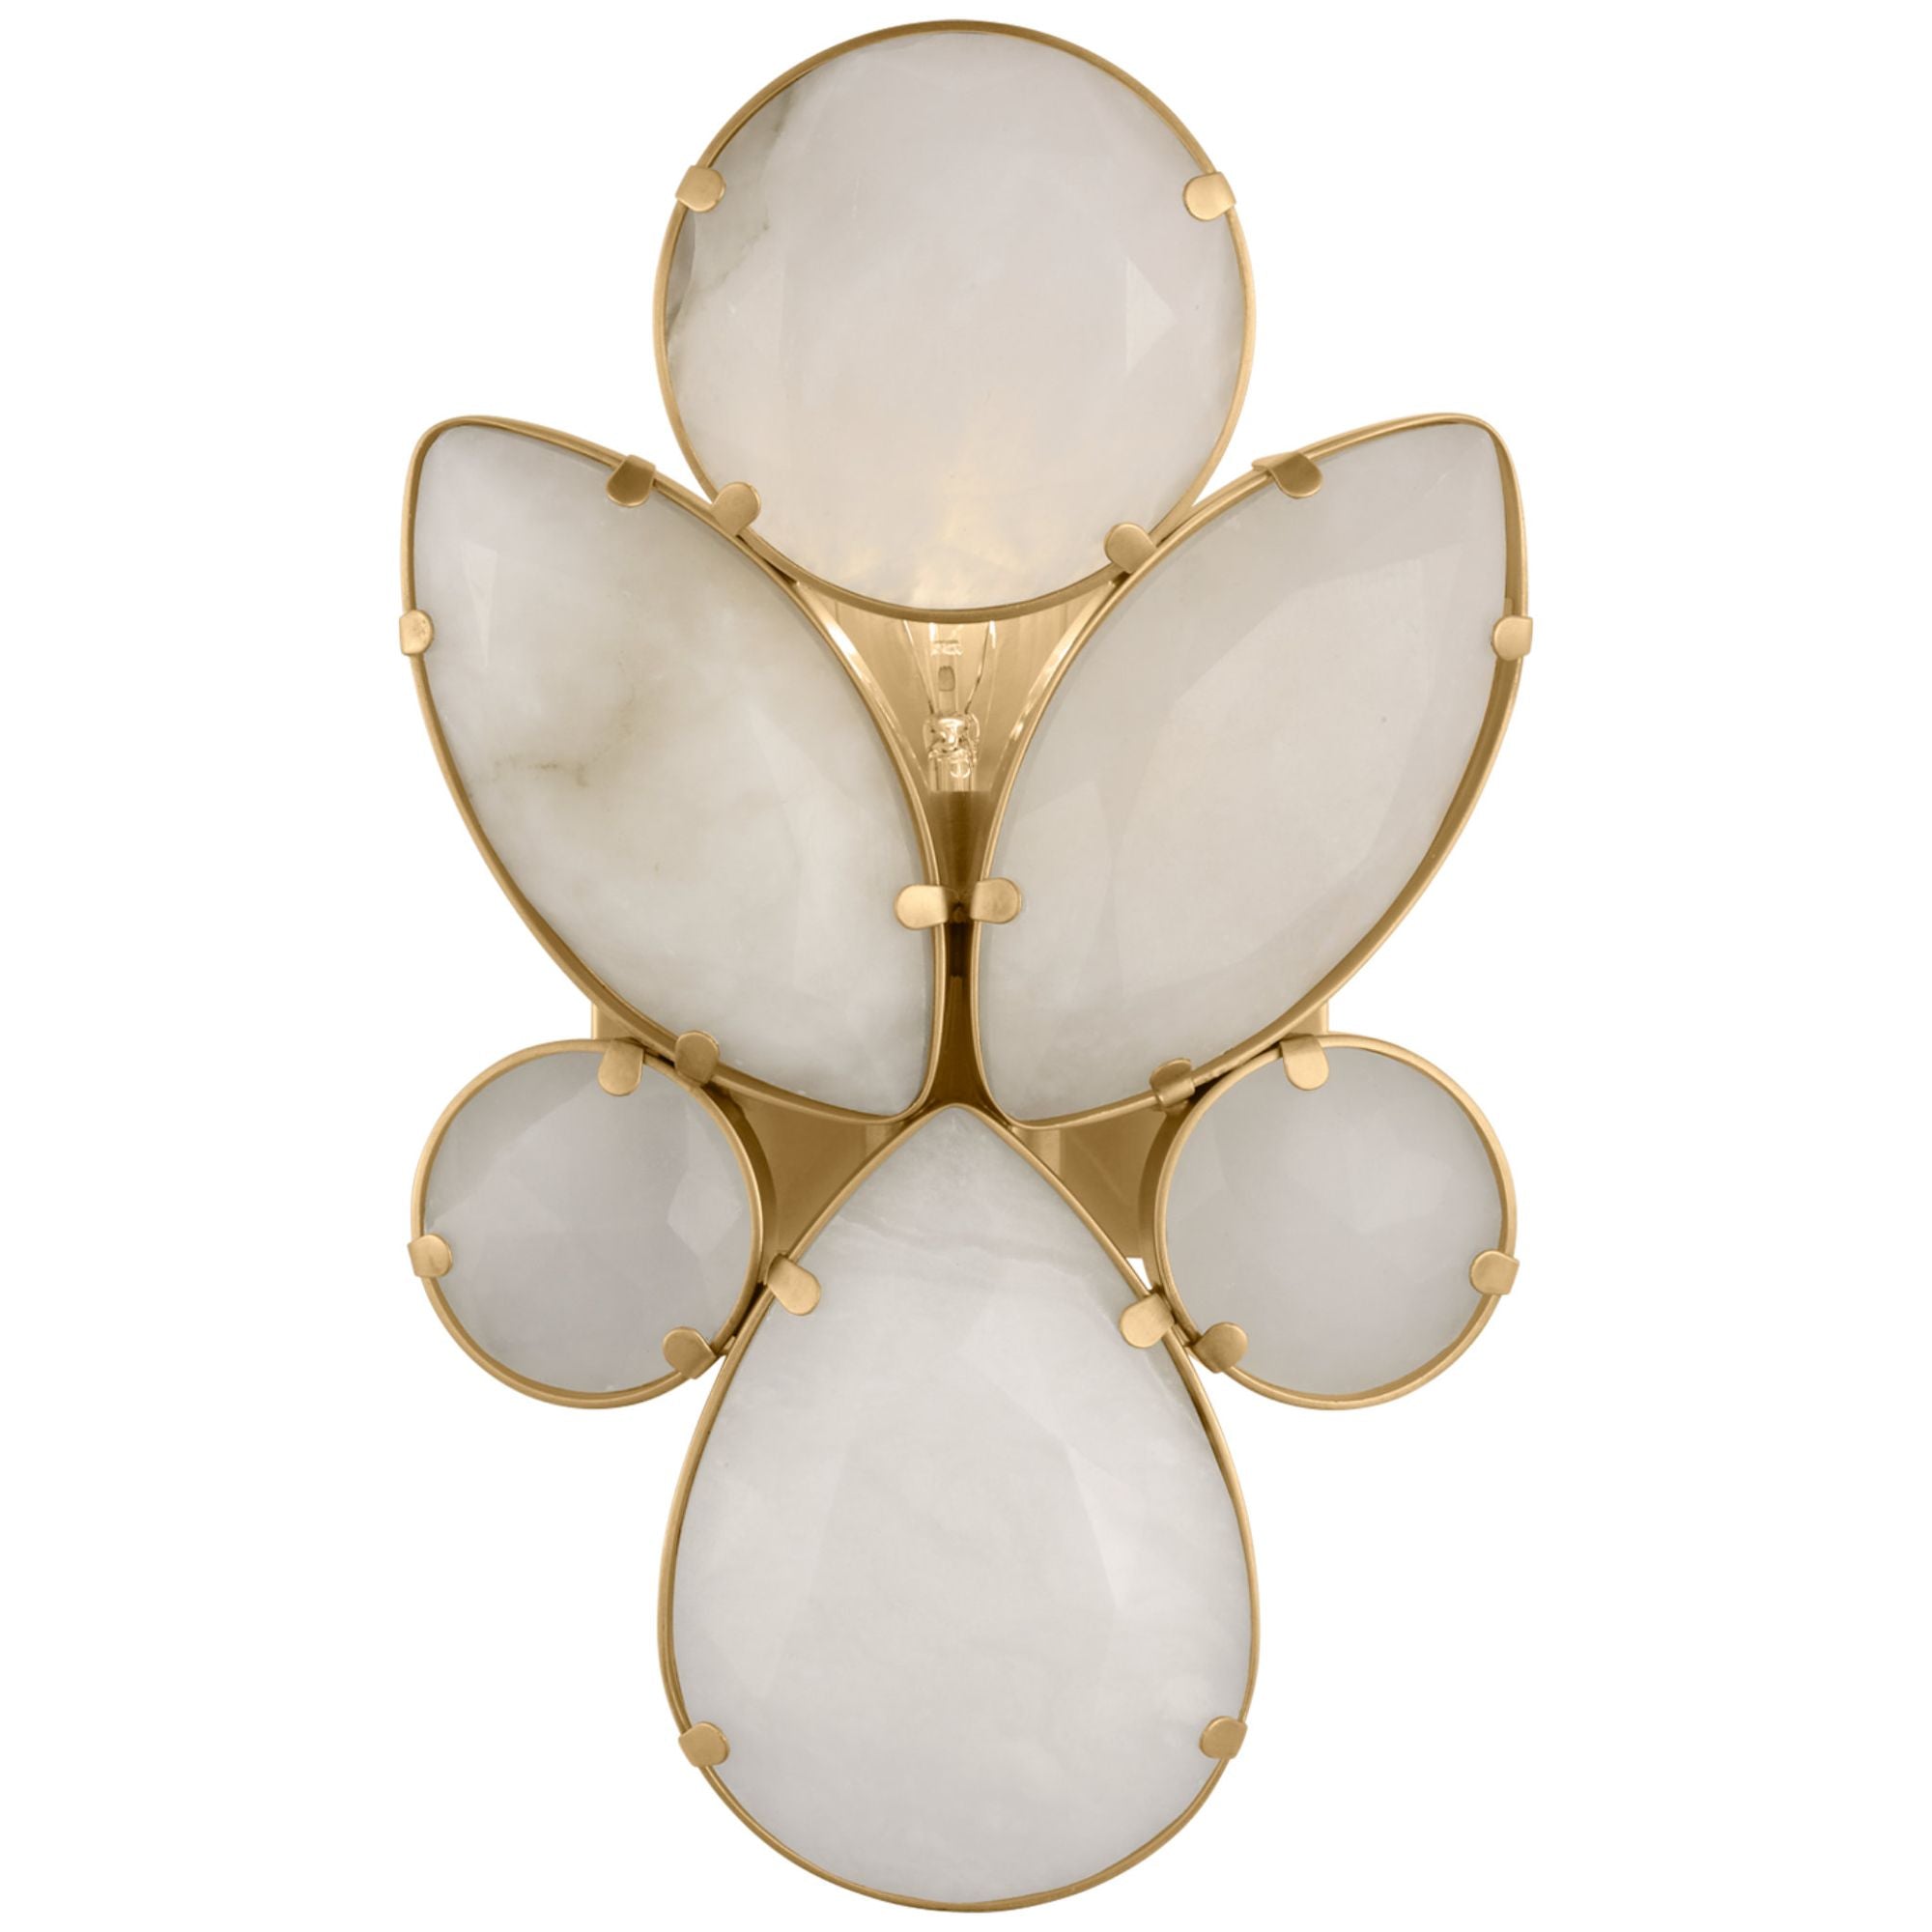 kate spade new york Lloyd Small Jeweled Sconce in Soft Brass with Alabaster